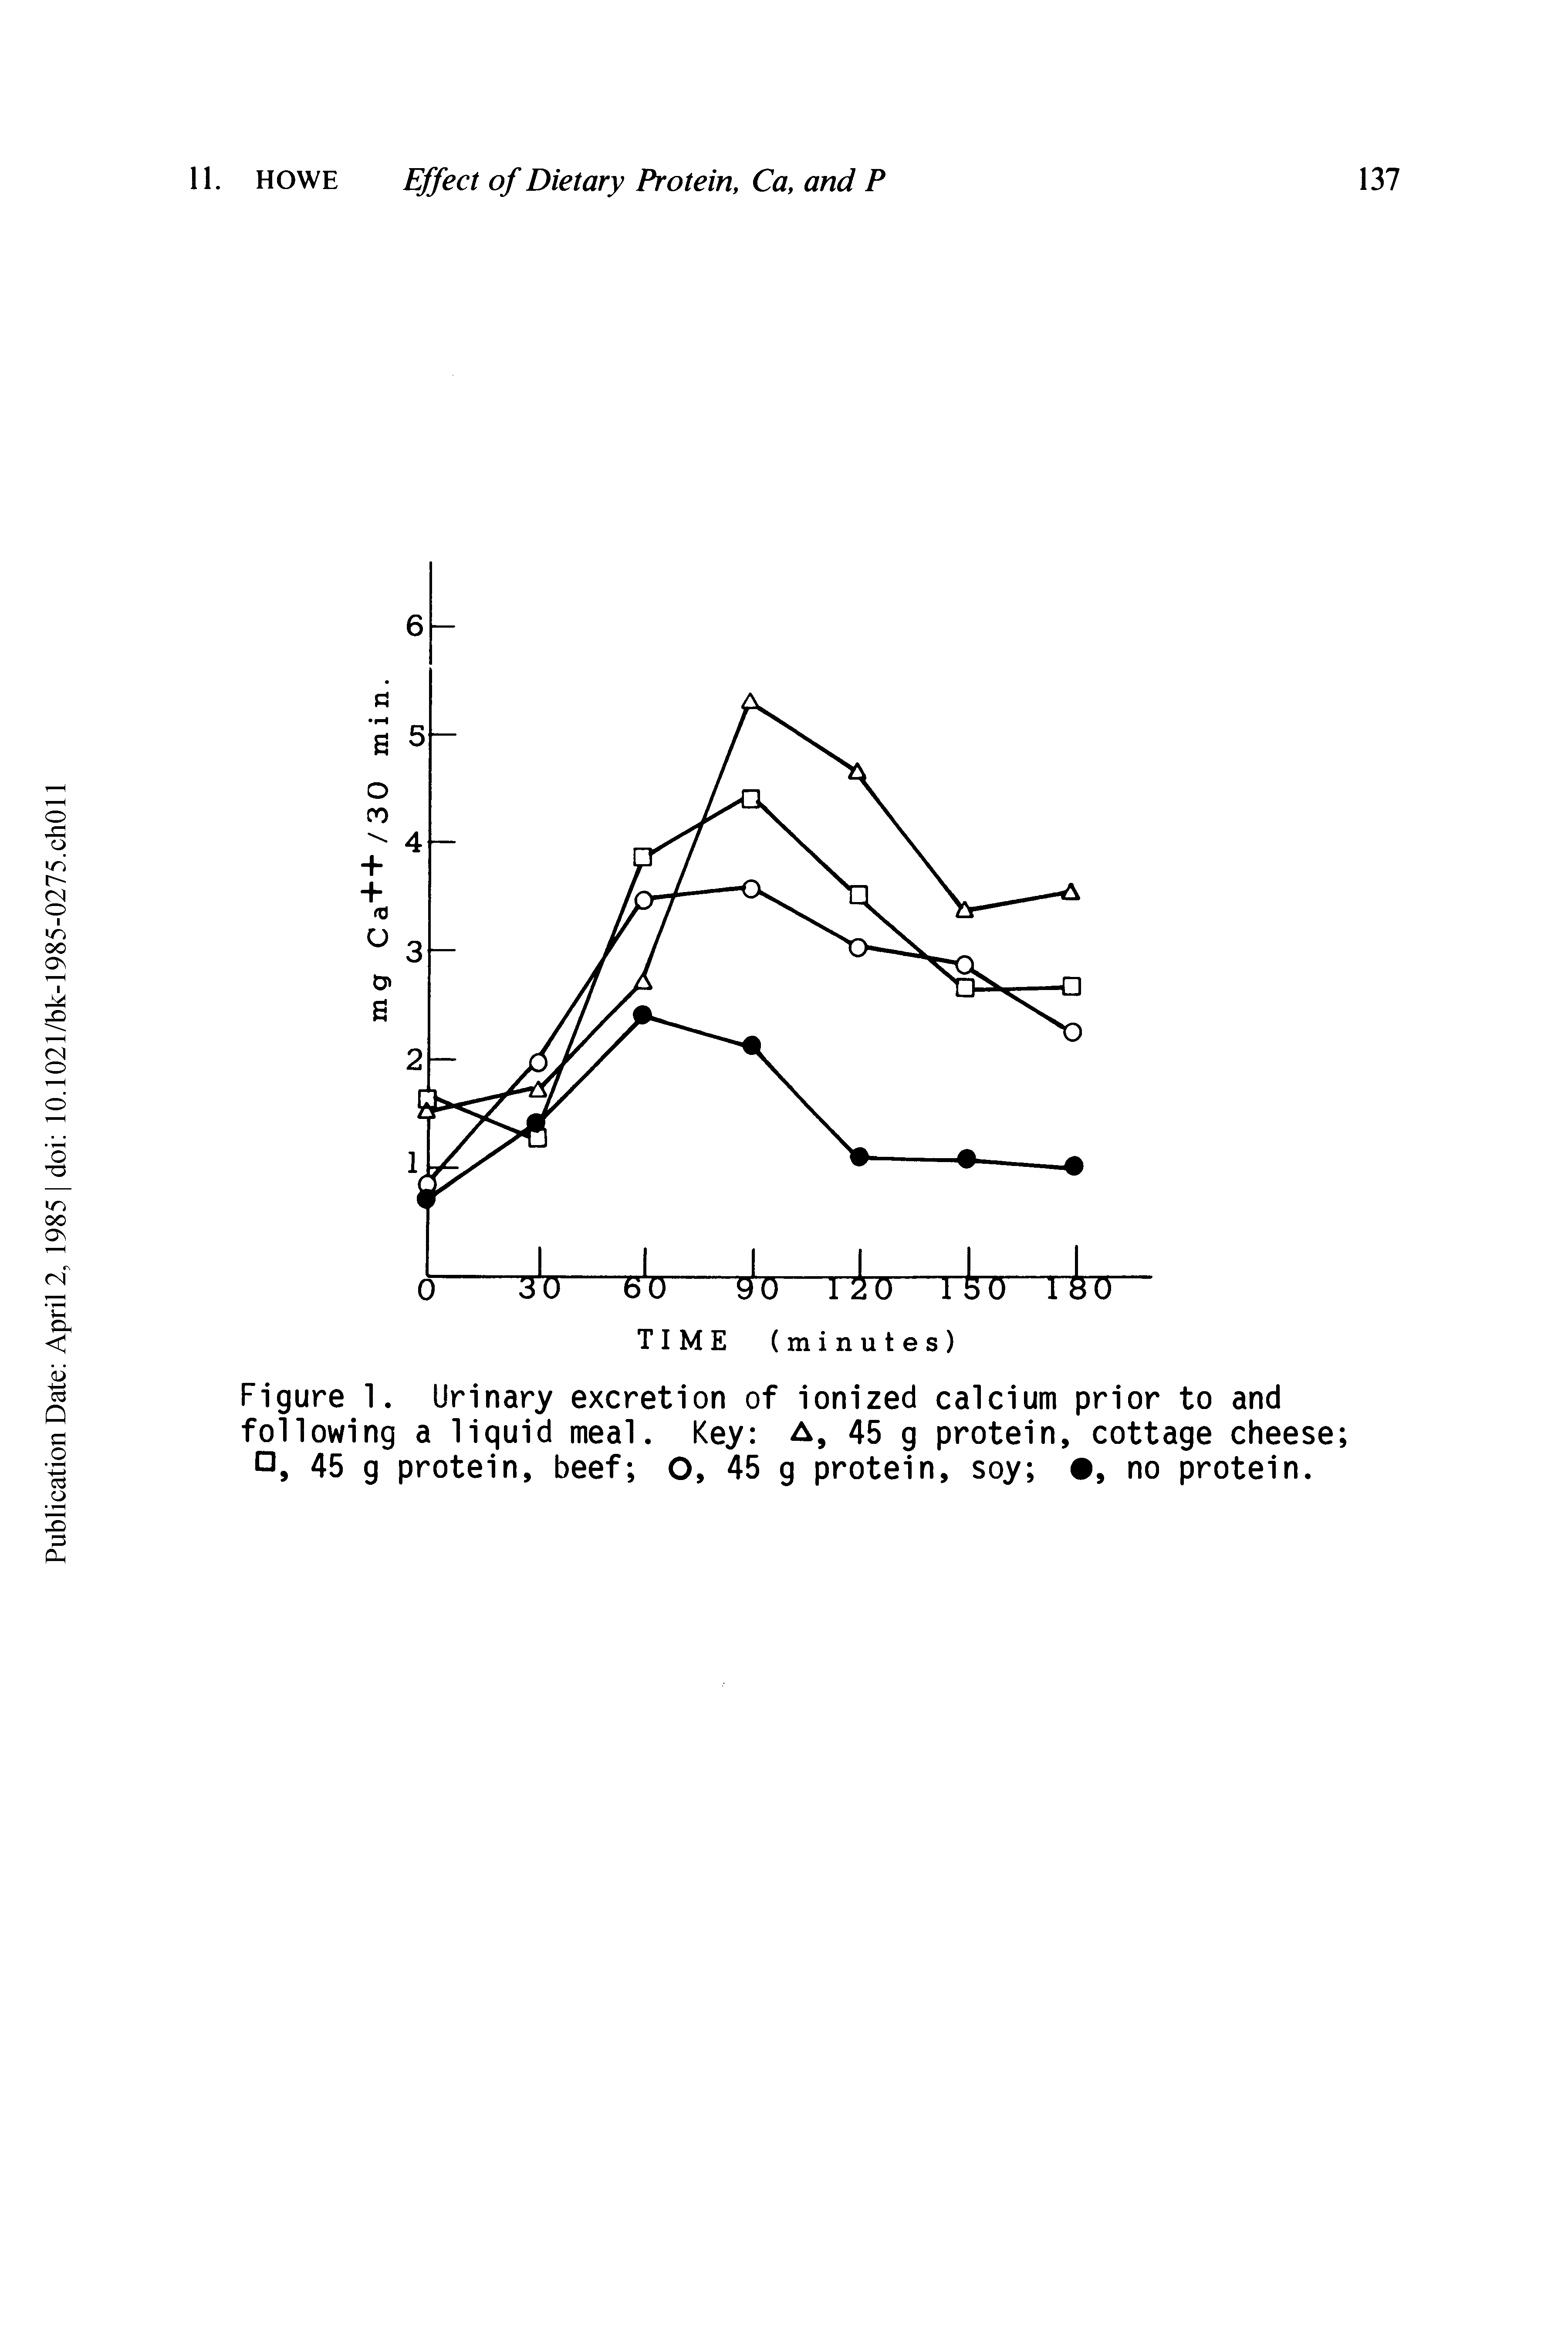 Figure 1. Urinary excretion of ionized calcium prior to and following a liquid meal. Key A, 45 g protein, cottage cheese D, 45 g protein, beef O, 45 g protein, soy , no protein.